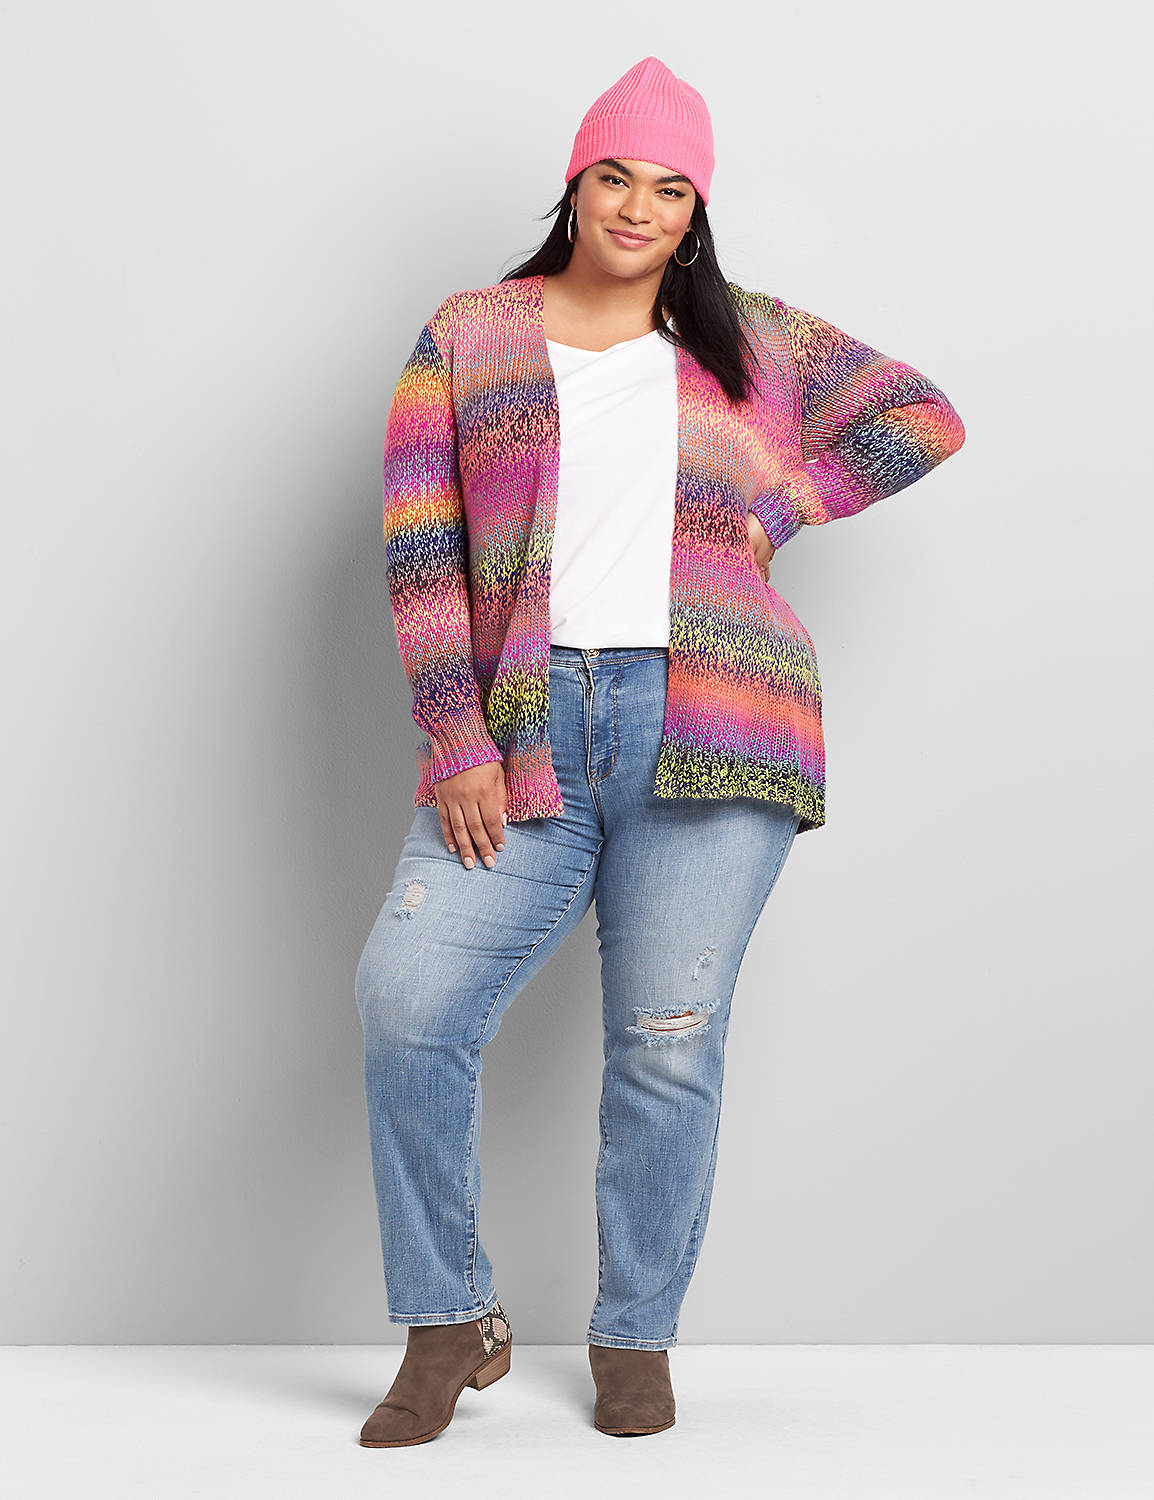 Long Sleeve Clean Front Overpiece in Rainbow Spacedye 1118019:Multi:14/16 Product Image 3